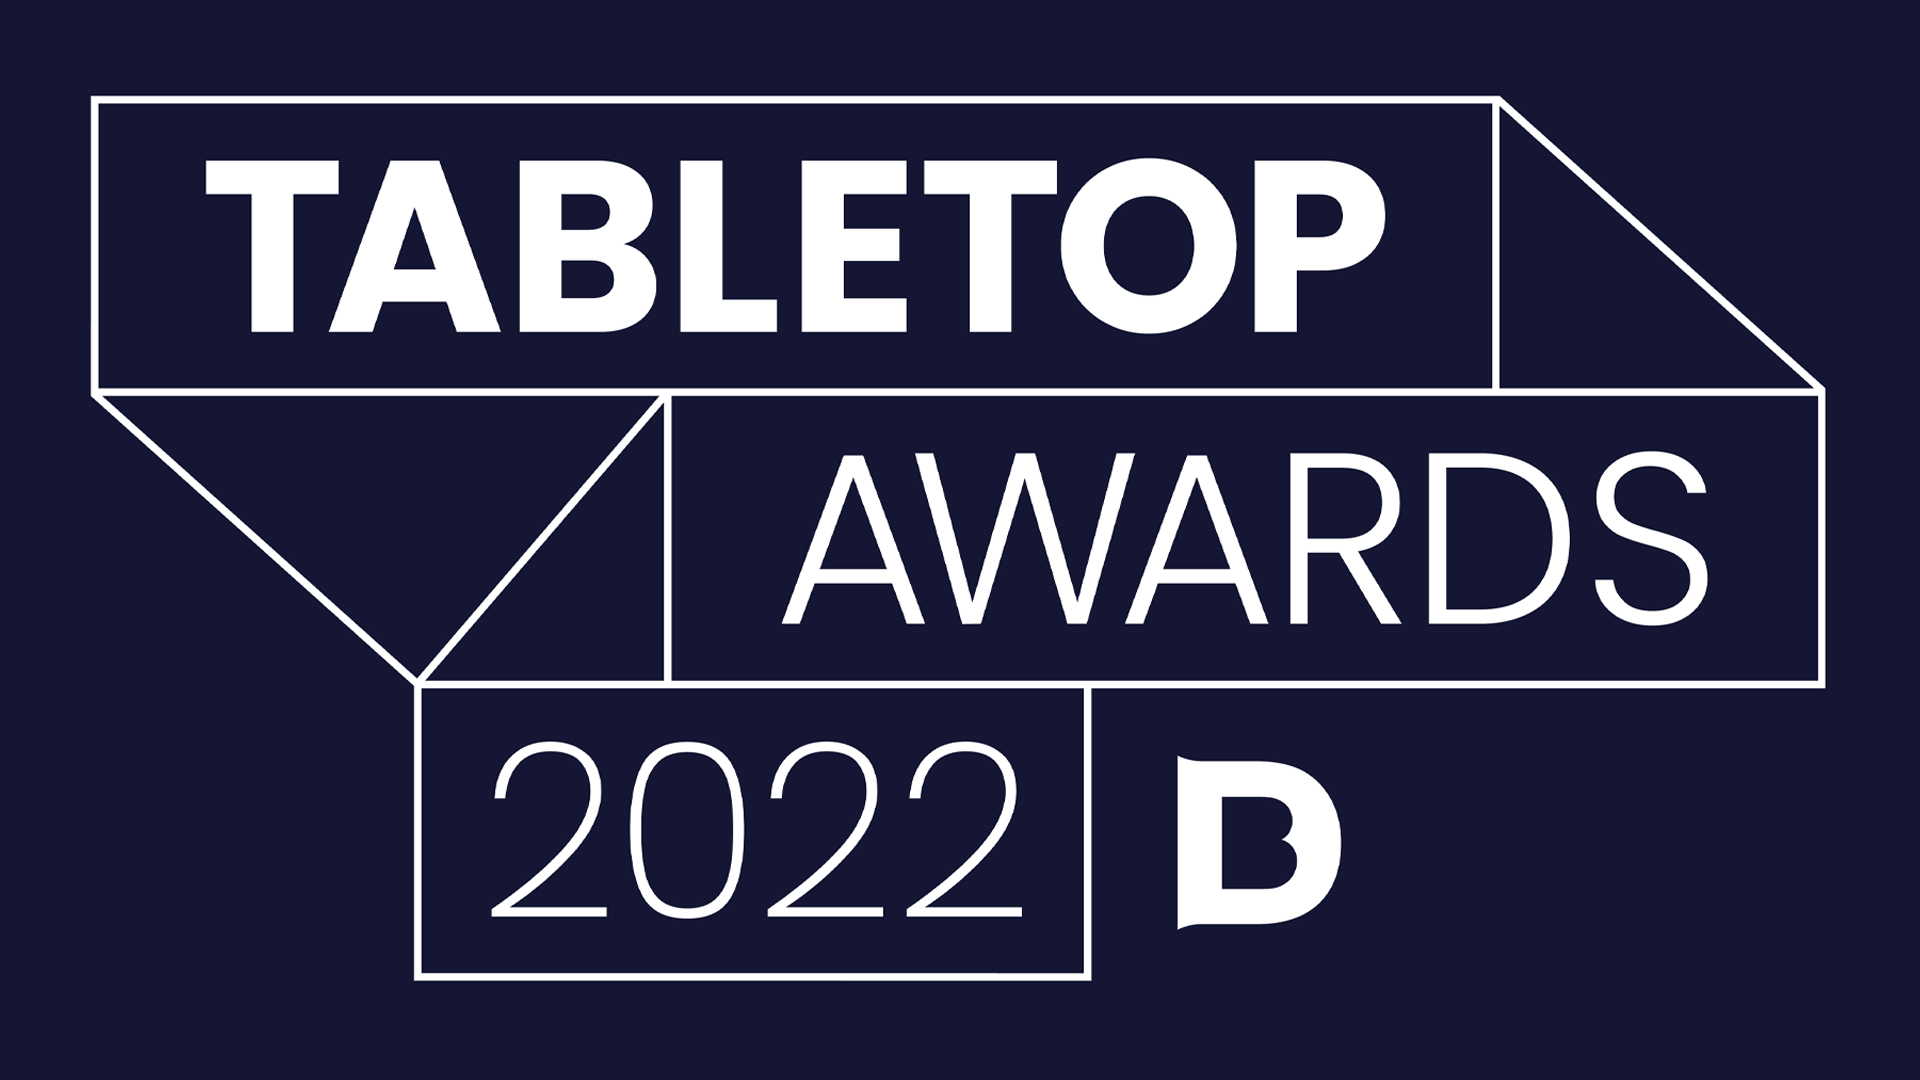 Image for Tabletop Awards 2022 winners: The year’s best board game, RPG, designers and publishers revealed!